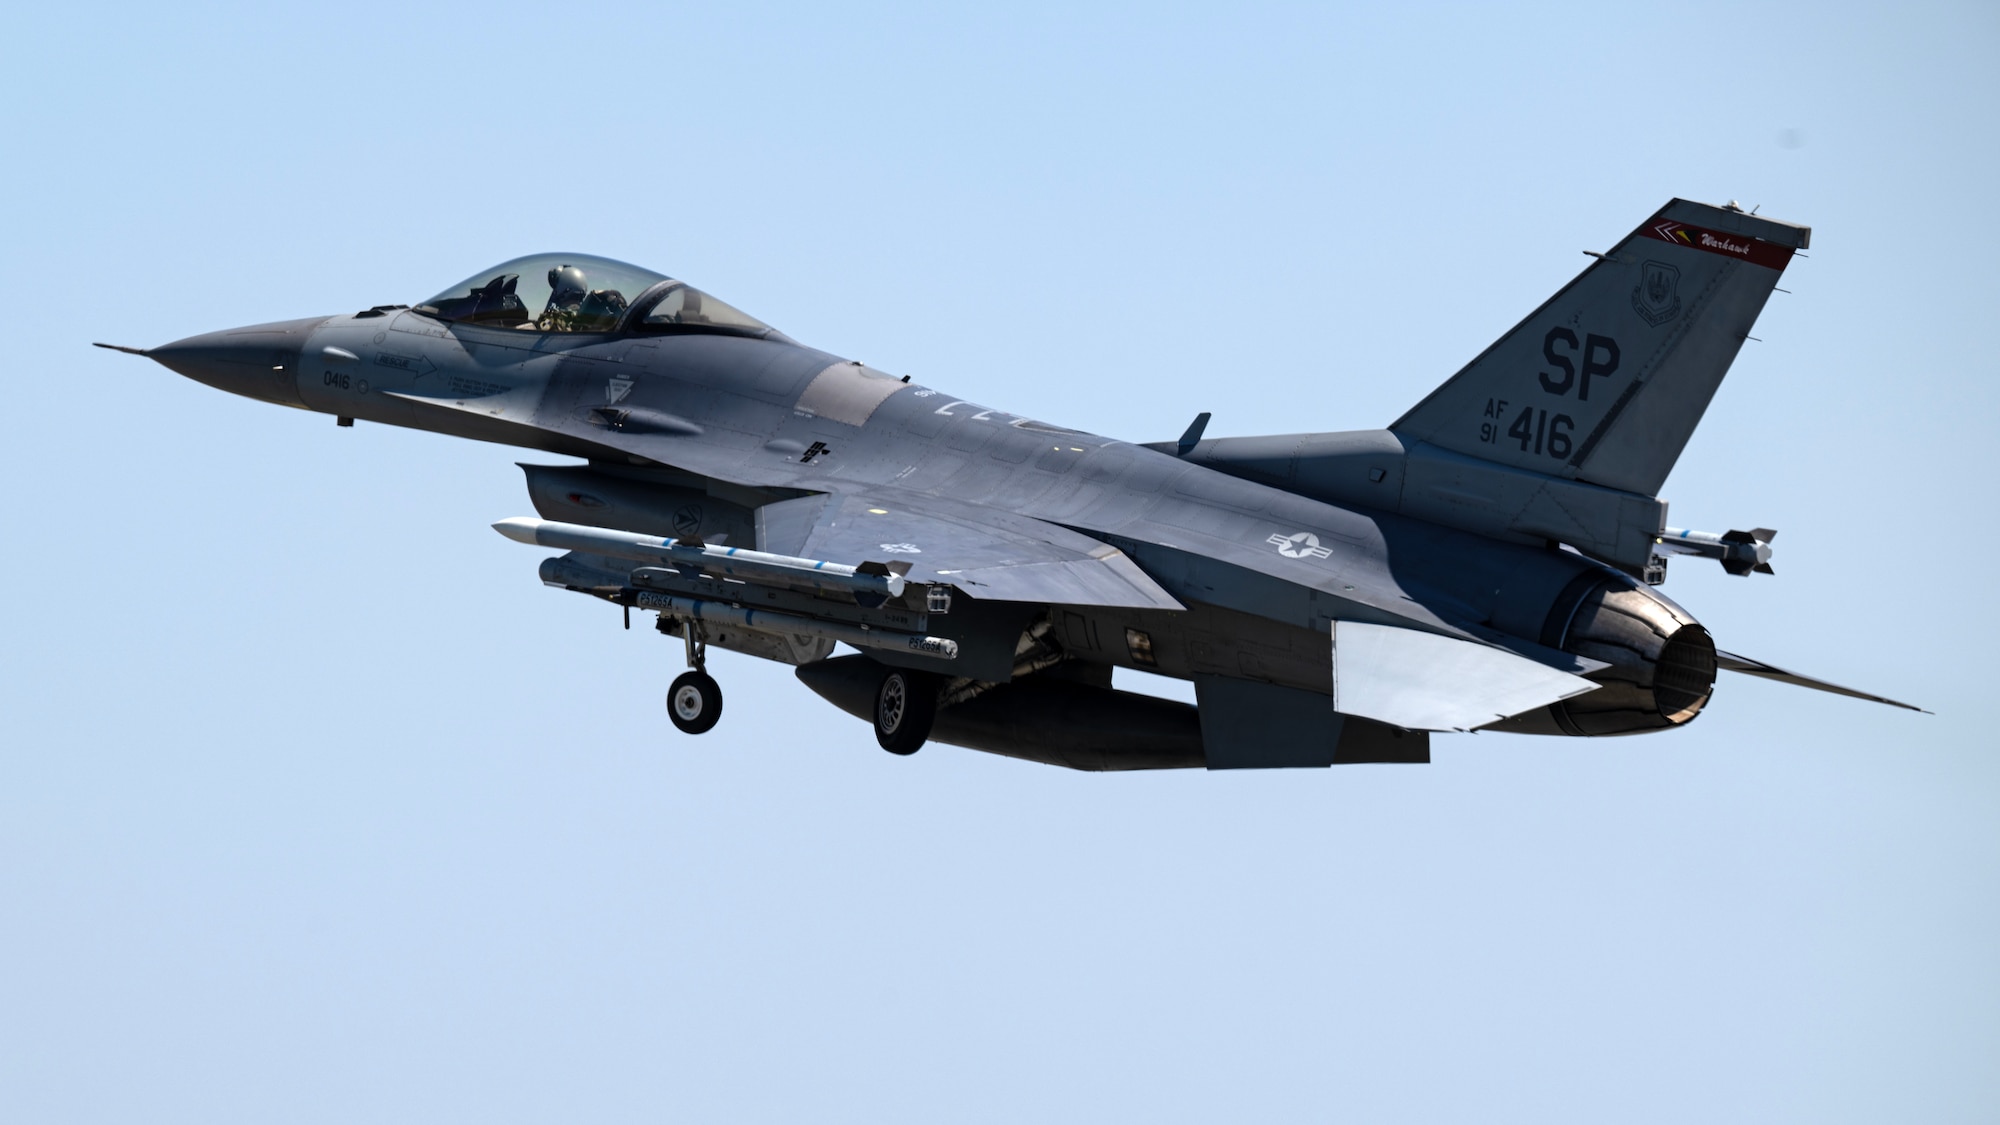 A U.S. Air Force F-16 Fighting Falcon assigned to the 52nd Fighter Wing, takes off from the flight line at Spangdahlem Air Base, Germany, during Air Defender 23 (AD23), June 13, 2023. The 480th Generation Squadron is the only active duty Air Force fighter unit participating in the German-led collective defense exercise. The U.S. is committed to maintaining a credible and permanent presence in Europe. The relationships built over the last 74 years provide a strong foundation with strategic access to respond to threats against the United States as well as threats to our NATO allies and partners. (U.S. Air Force photo by Tech. Sgt. Anthony Plyler)